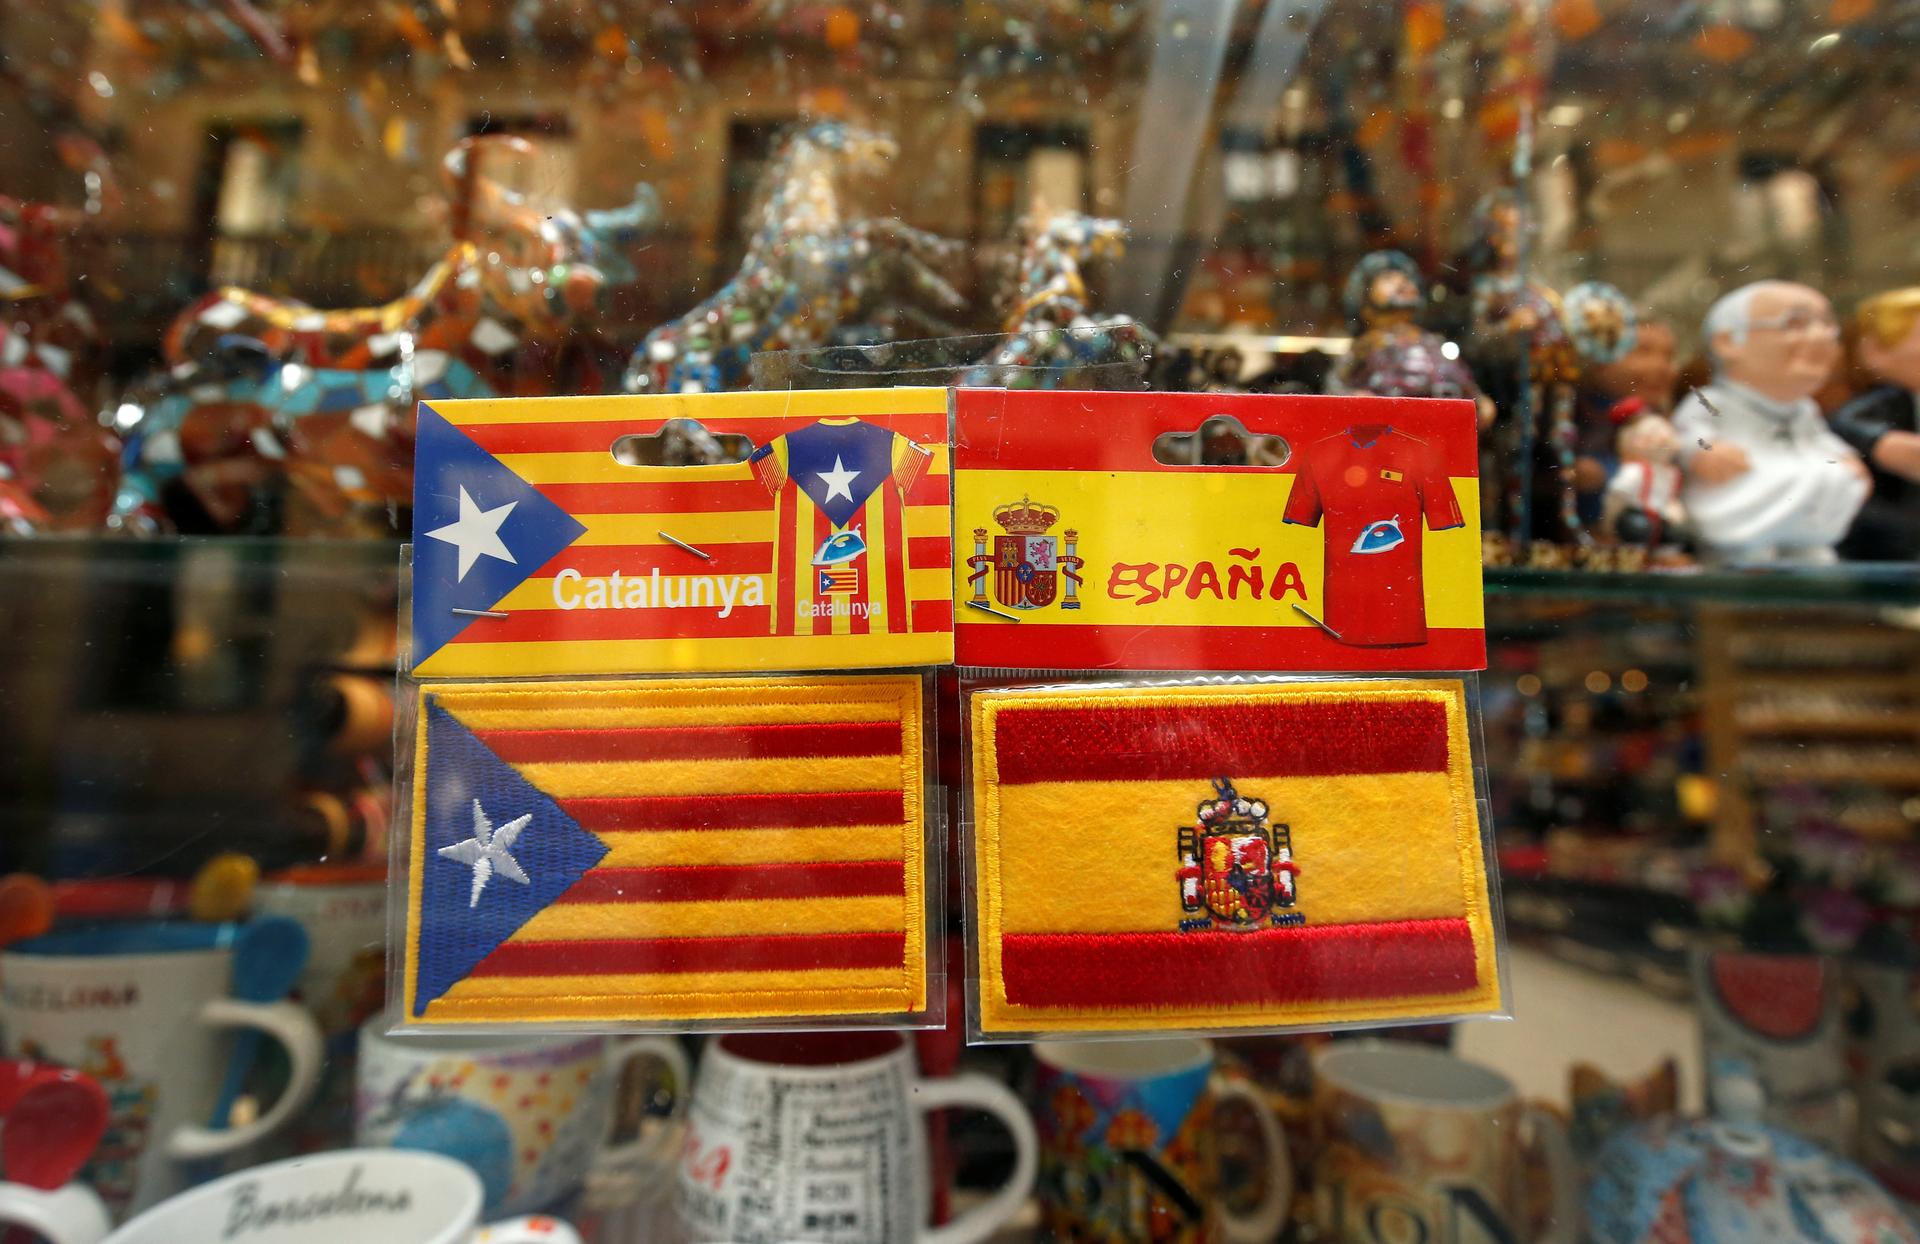 Patches of "Estelada" (Catalan separatist flag) and Spain flags